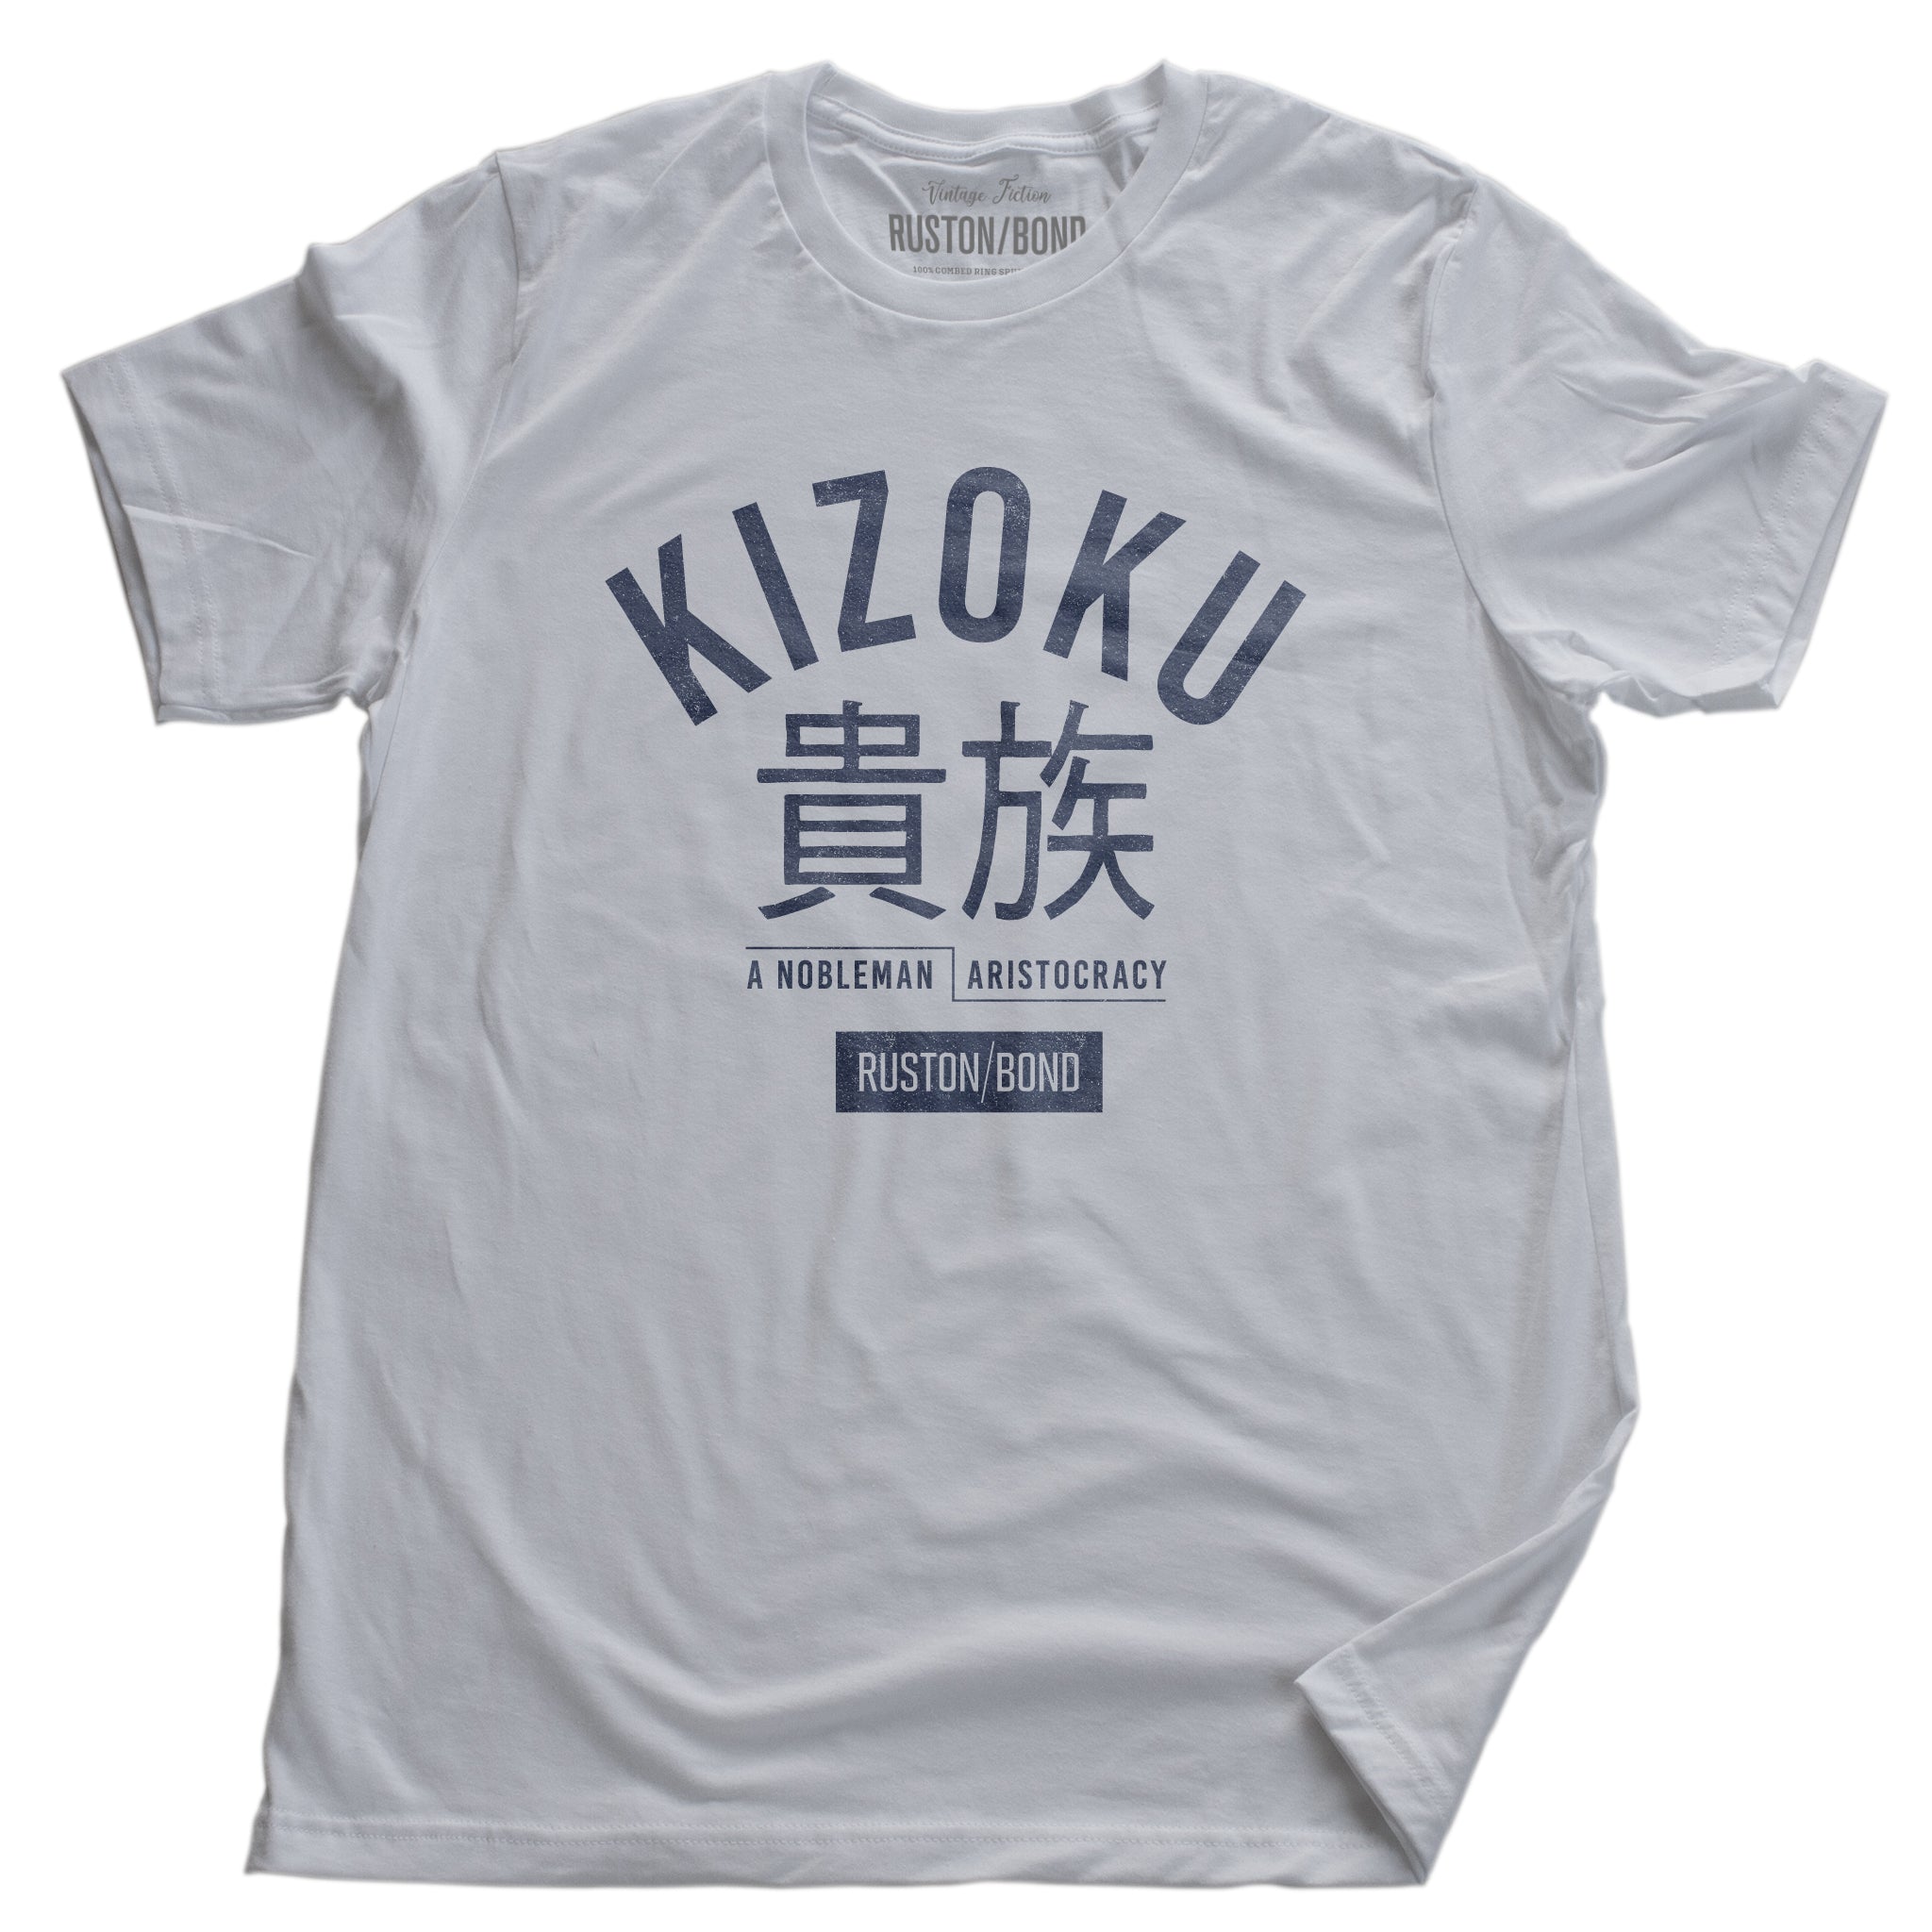 A retro fashion t-shirt in White with the bold typographic of the Japanese word “KIZOKU” and “a nobleman / aristocracy” below the Japanese characters. By the fashion brand Ruston/Bond, from wolfsaint.net. 